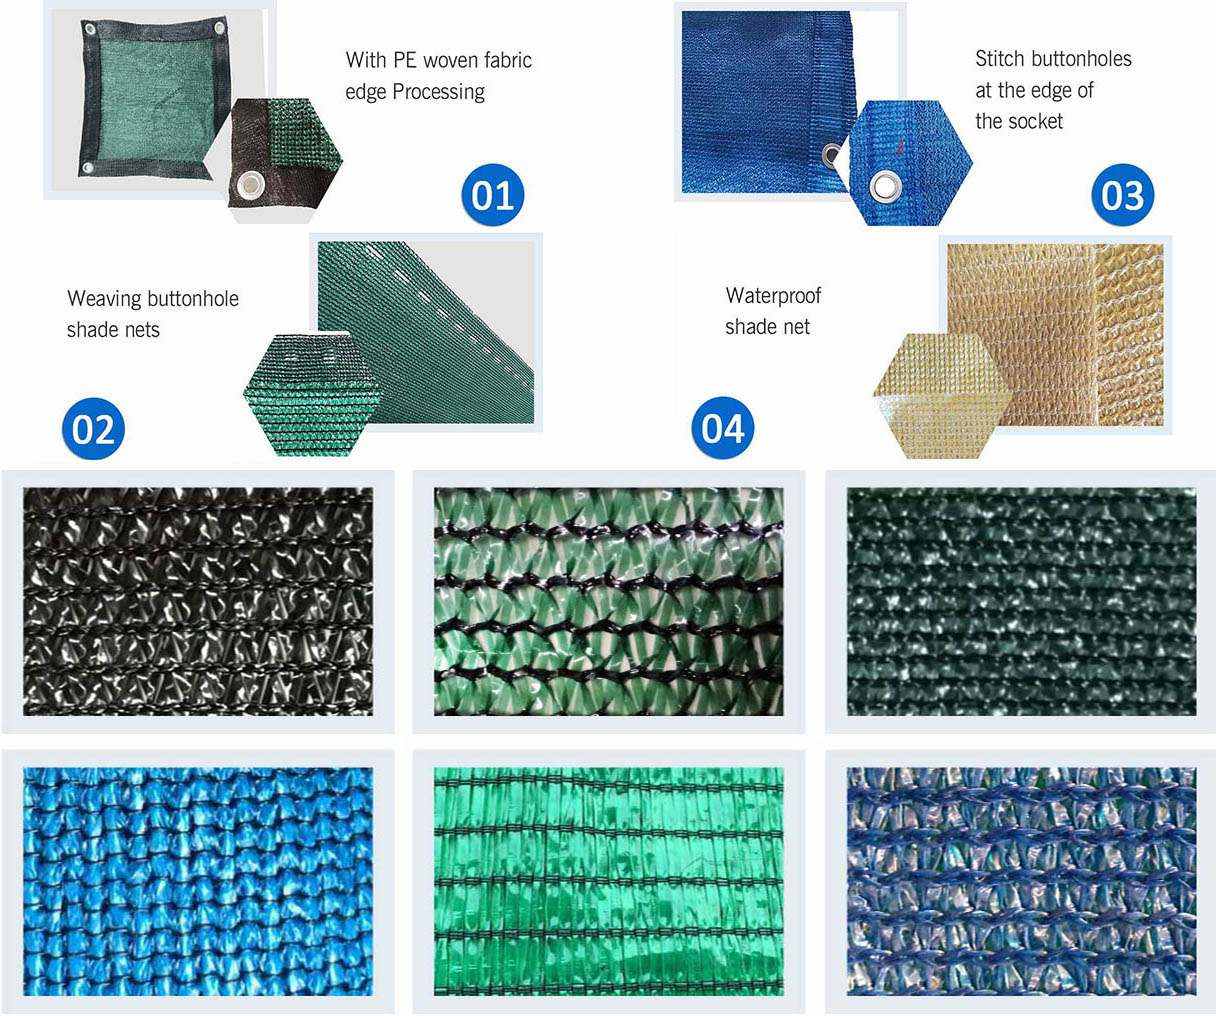 How to choose black shade and green shade net？